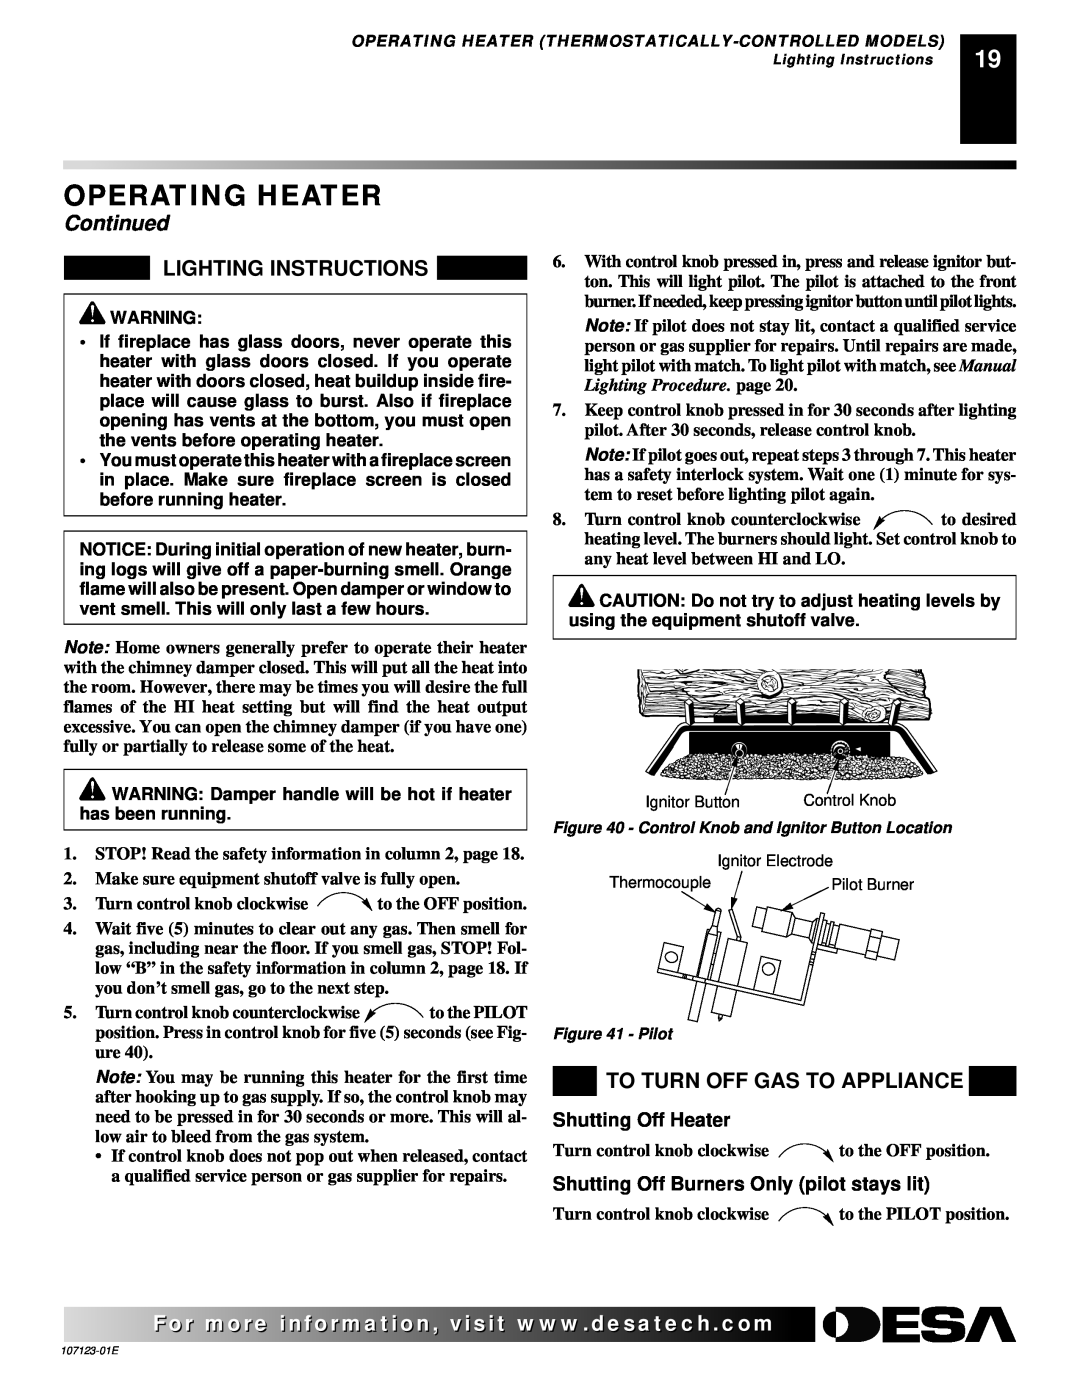 Desa CGD3018NT, CRL3124N, CRL2718N Operating Heater, Continued, Lighting Instructions, To Turn Off Gas To Appliance 